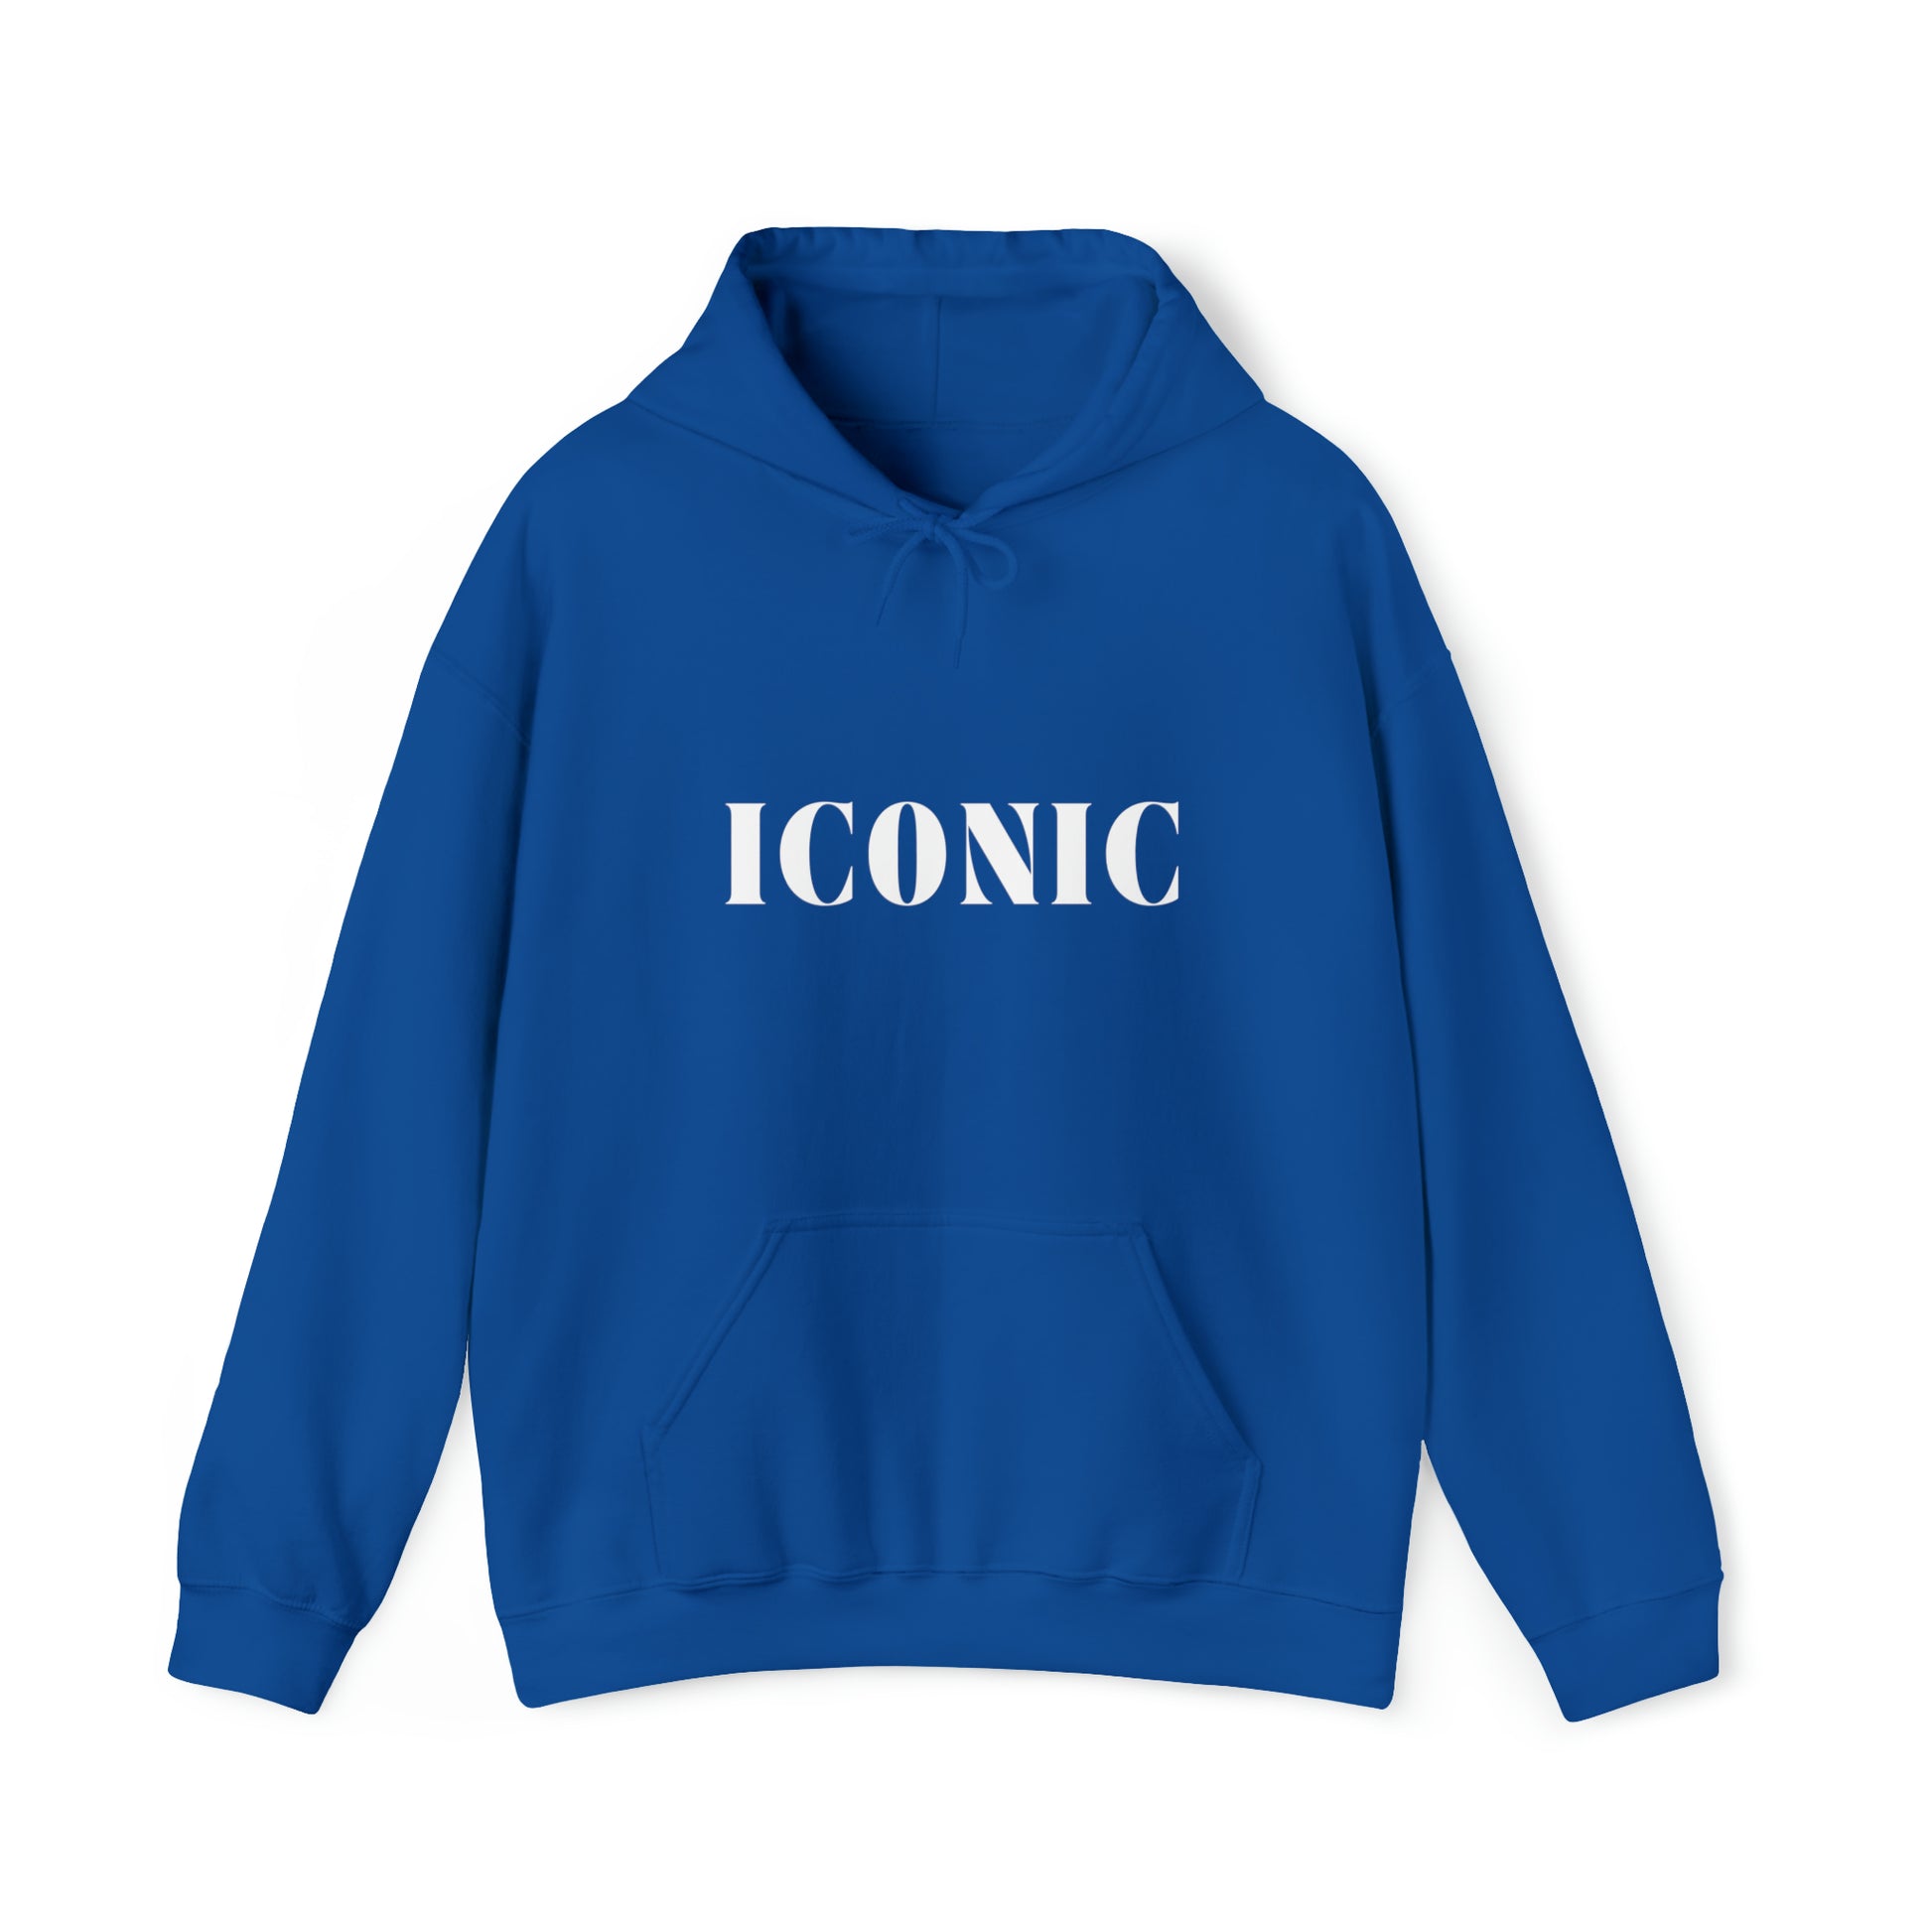 S Royal Iconic Hoodie from HoodySZN.com